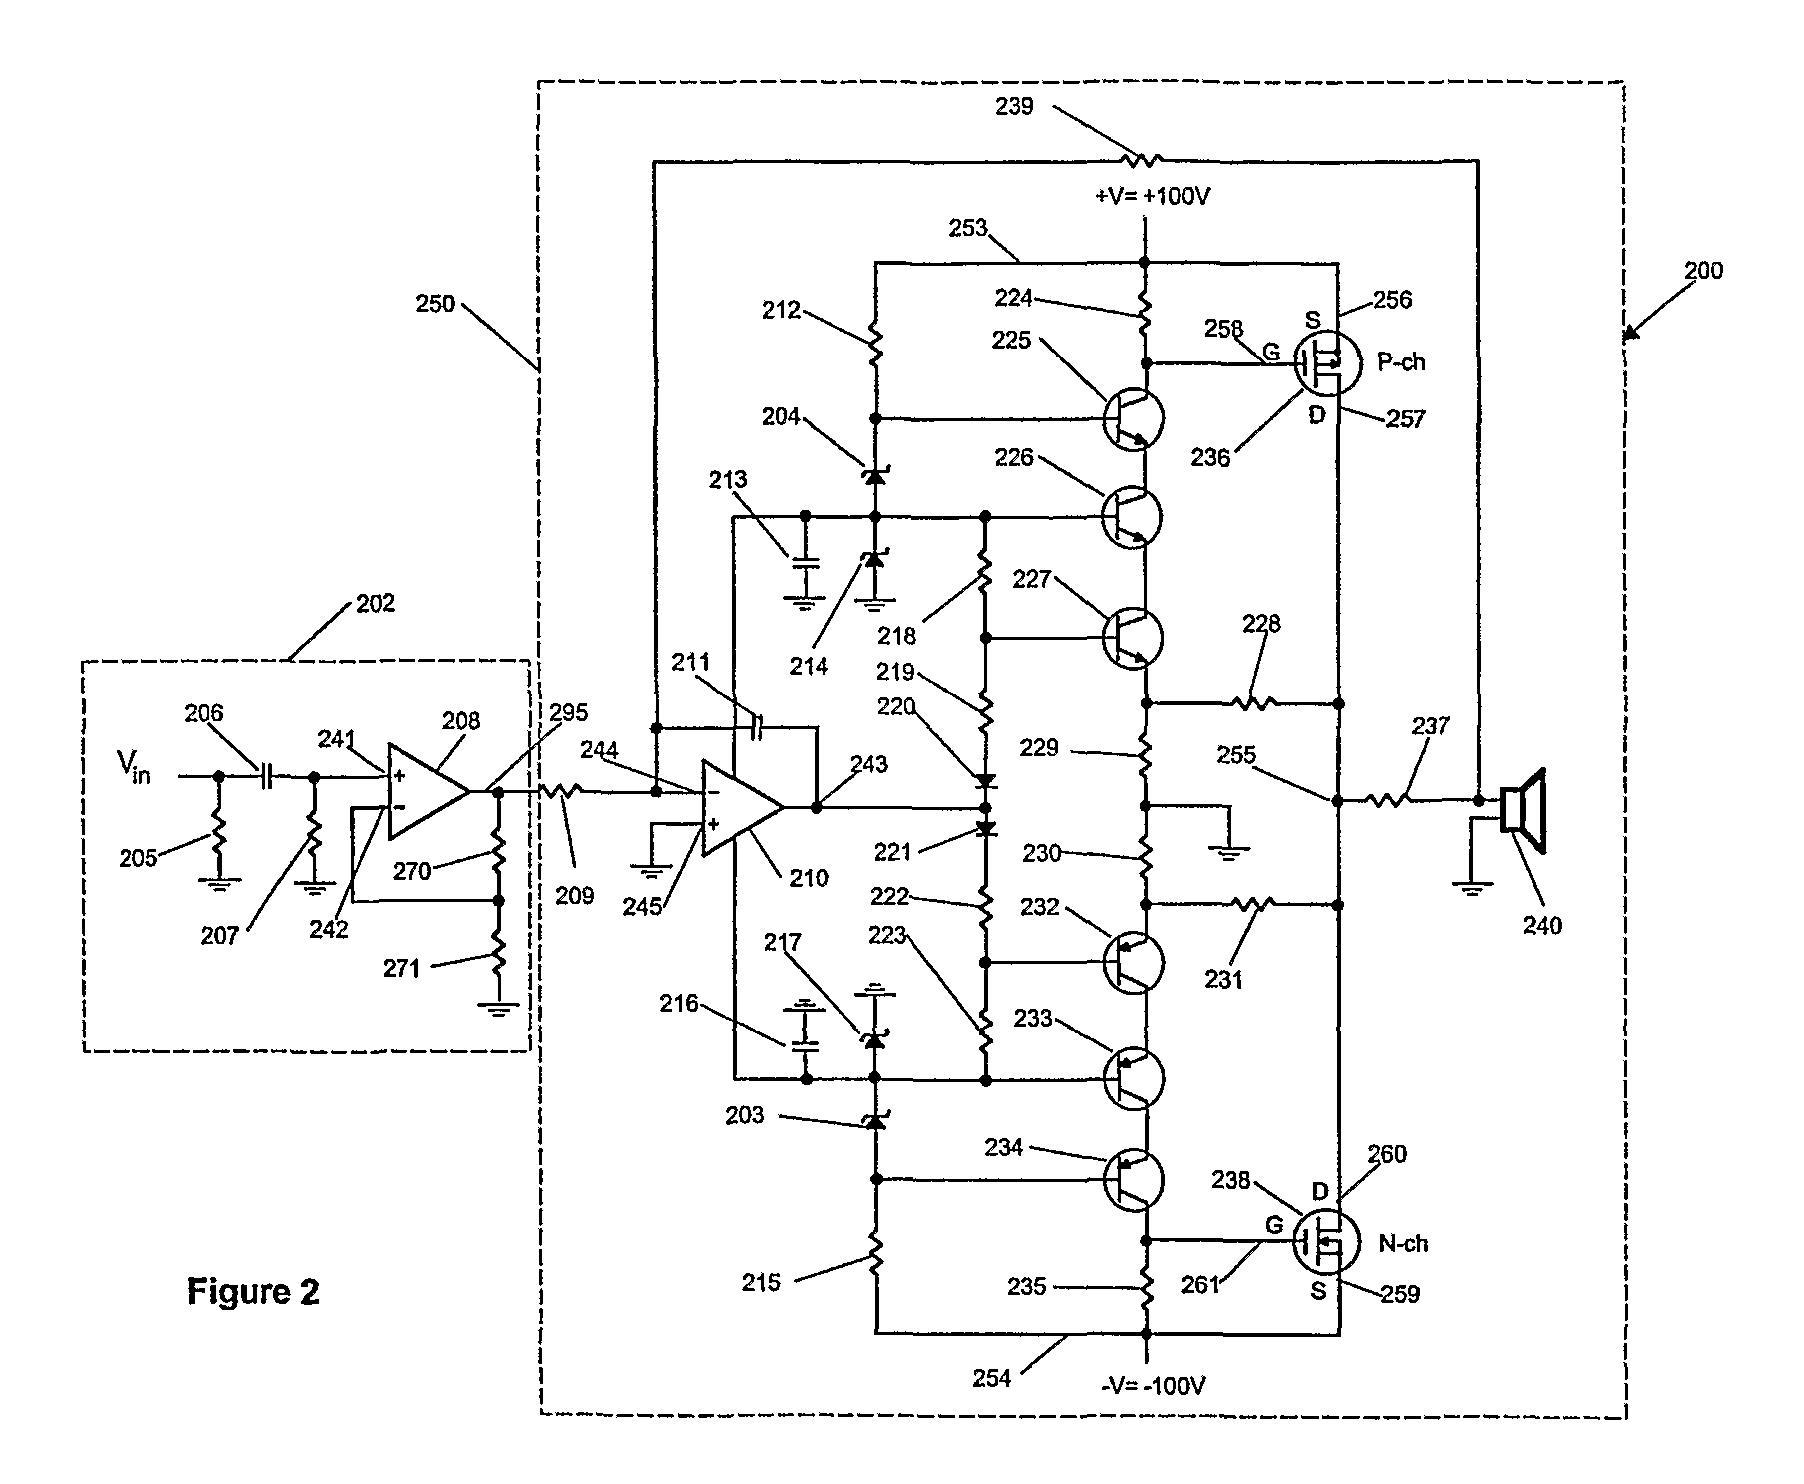 Medium Voltage or High Voltage Audio Power Amplifier and Protection Circuit